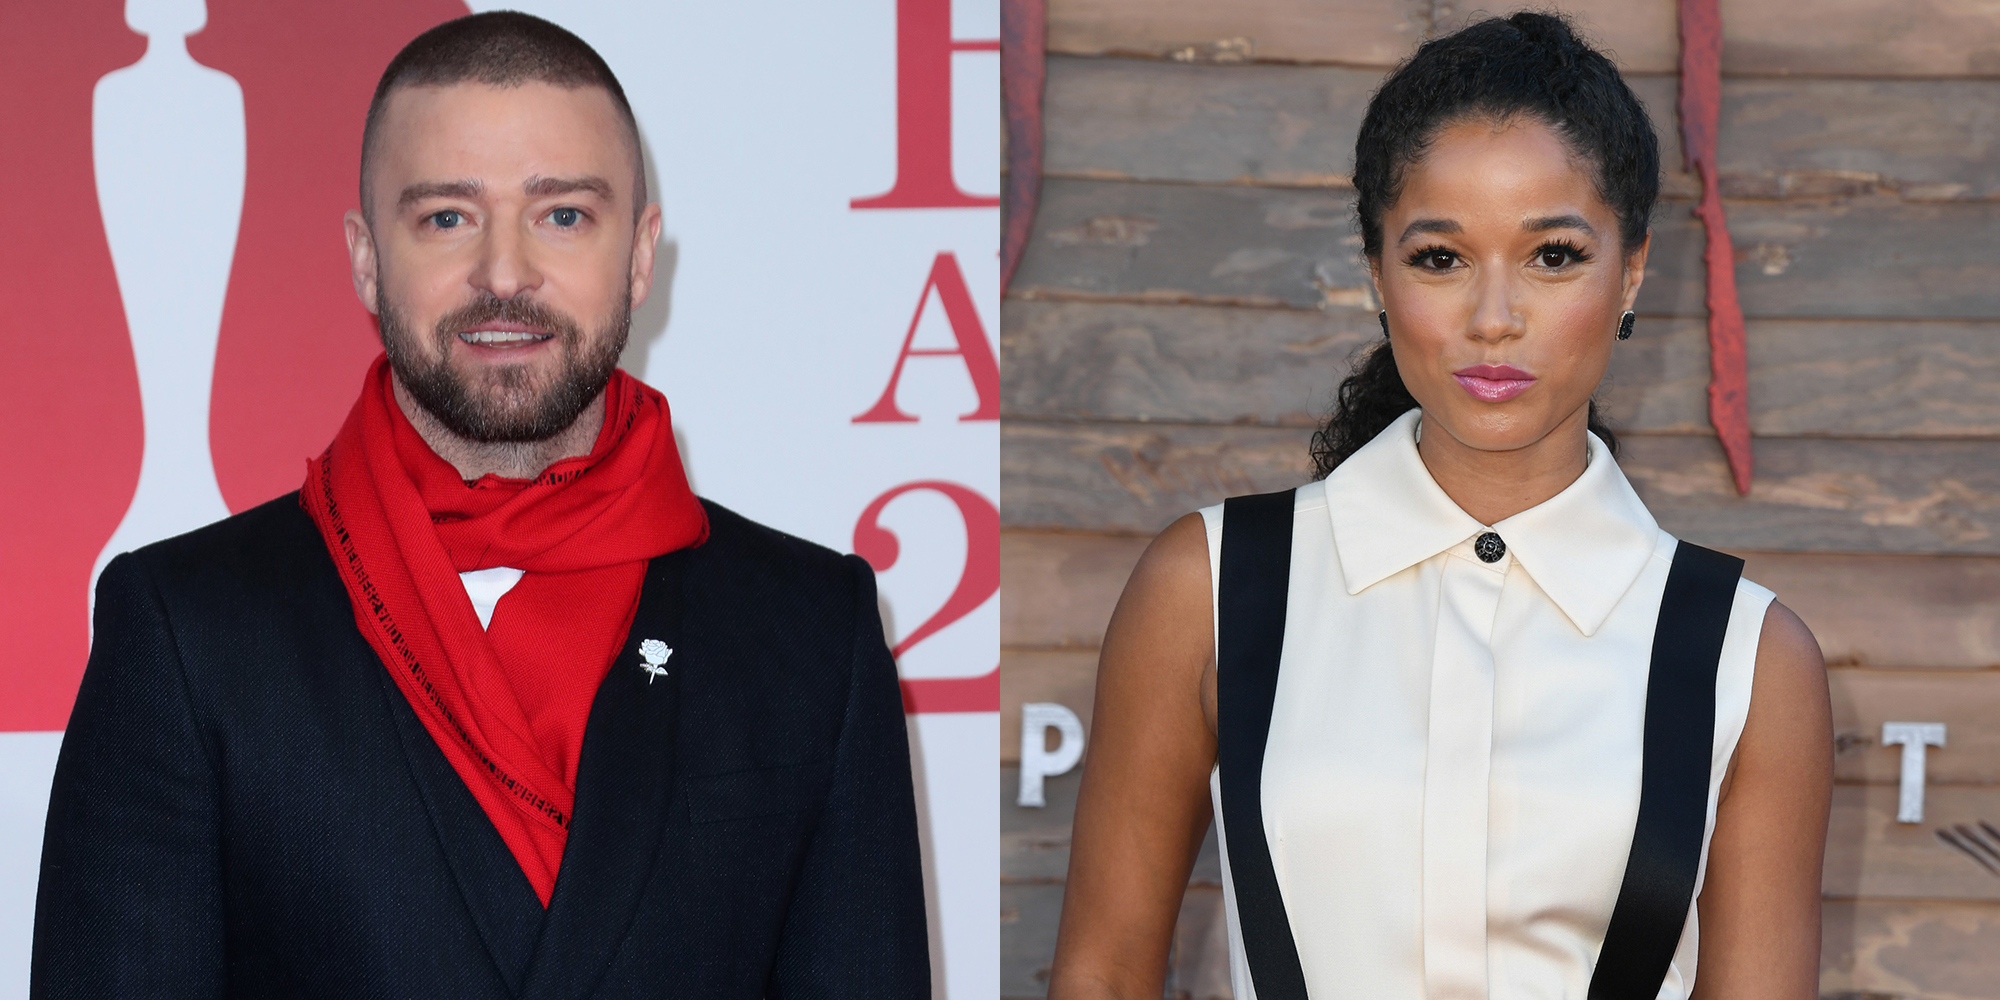 <p>This is probably not what <a href="https://www.wonderwall.com/celebrity/profiles/overview/justin-timberlake-324.article">Justin Timberlake</a> meant when he released "What Goes Around" -- his second hit single about cheating... In late November 2019, the singer-actor was accused of <a href="https://www.wonderwall.com/celebrity/couples/justin-timberlake-holding-hands-alisha-wainwright-cheated-jessica-biel-celeb-love-life-news-late-november-2019-hollywood-romance-report-3021697.gallery">cheating on his wife</a>, Jessica Biel, after he was caught on camera appearing overly touchy-feely with "Raising Dion" star Alisha Wainwright -- who's playing his love interest in the upcoming sports drama "Palmer" -- during a night out in New Orleans. After the photos of the co-stars holding hands hit the Internet, sources close to the superstar insisted that his relationship with the former "Shadowhunters" actress was "completely innocent" and that "nothing romantic" was going on between them. Justin later released <a href="https://www.wonderwall.com/celebrity/couples/emma-stone-engaged-celeb-love-life-news-early-december-2019-hollywood-romance-report-3021744.gallery?photoId=1068236">a statement</a> admitting that he "drank way too much" and "displayed a strong lapse in judgment" -- but he maintained that "nothing happened" with Alisha. He also apologized to Jessica, who reportedly <a href="https://www.wonderwall.com/celebrity/jessica-biel-reportedly-trusts-justin-timberlake-didnt-cheat-after-apology-plus-more-news-3021763.gallery">believes he didn't cheat on her</a> and is <a href="https://www.wonderwall.com/celebrity/couples/kourtney-kardashian-boyfriend-younes-bendjima-dating-again-celeb-love-life-news-mid-december-2019-hollywood-romance-report-3021796.gallery?photoId=1069532">"standing by" him in spite of feeling embarrassed by the whole ordeal</a>. Sadly, it wasn't the first time JT made headlines for getting cozy with a colleague: He raised eyebrows back in 2014 when he was seen dancing -- "in a way that no married man should ever dance with someone who is not his wife," one eyewitness told Star magazine -- with a female backup dancer from his "20/20" tour at a nightclub in Paris. </p>